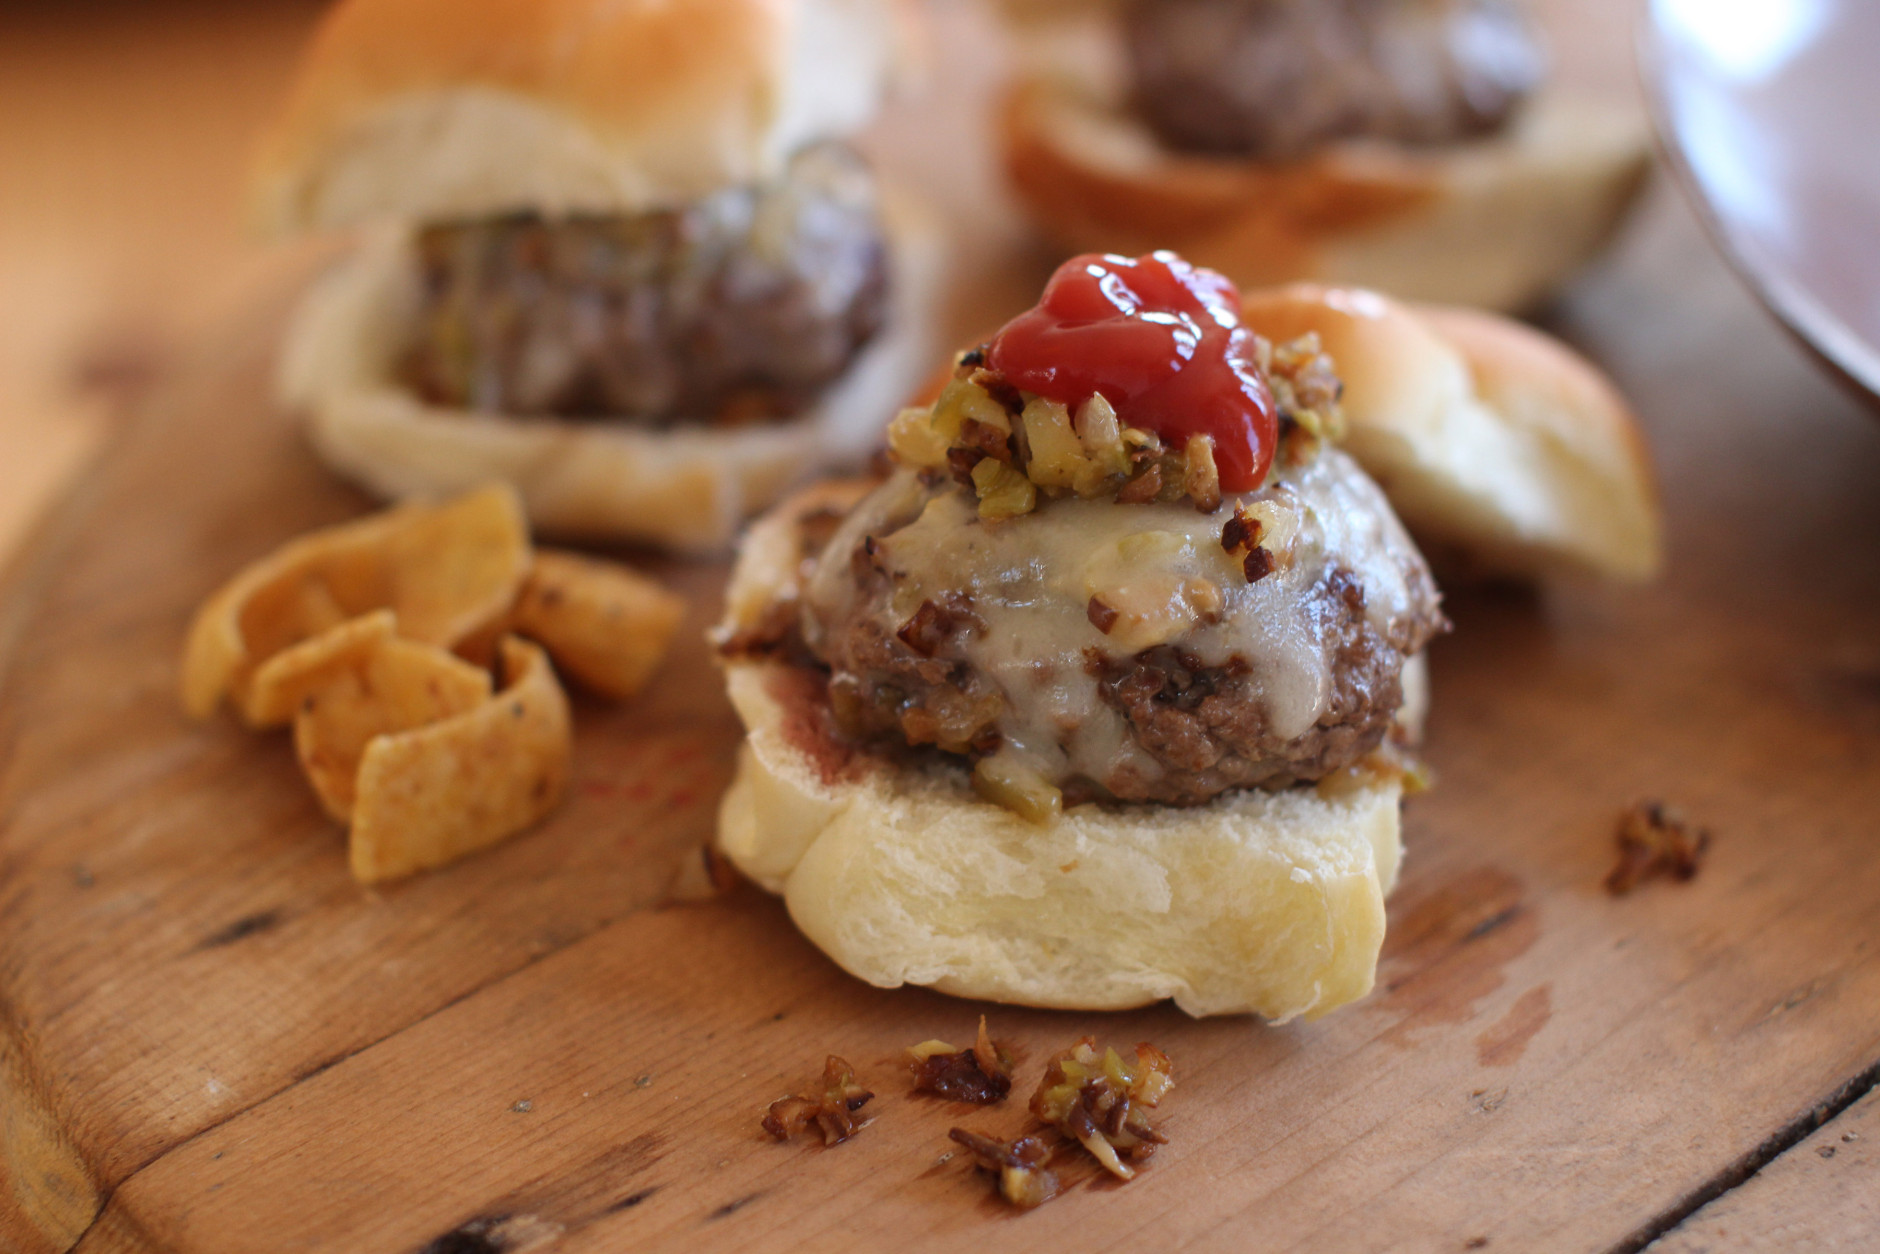 This Nov. 16, 2015 photo shows beer steamed cheese and mushroom beef sliders in Concord, N.H. This dish is from a recipe by Sara Moulton. (AP Photo/Matthew Mead)